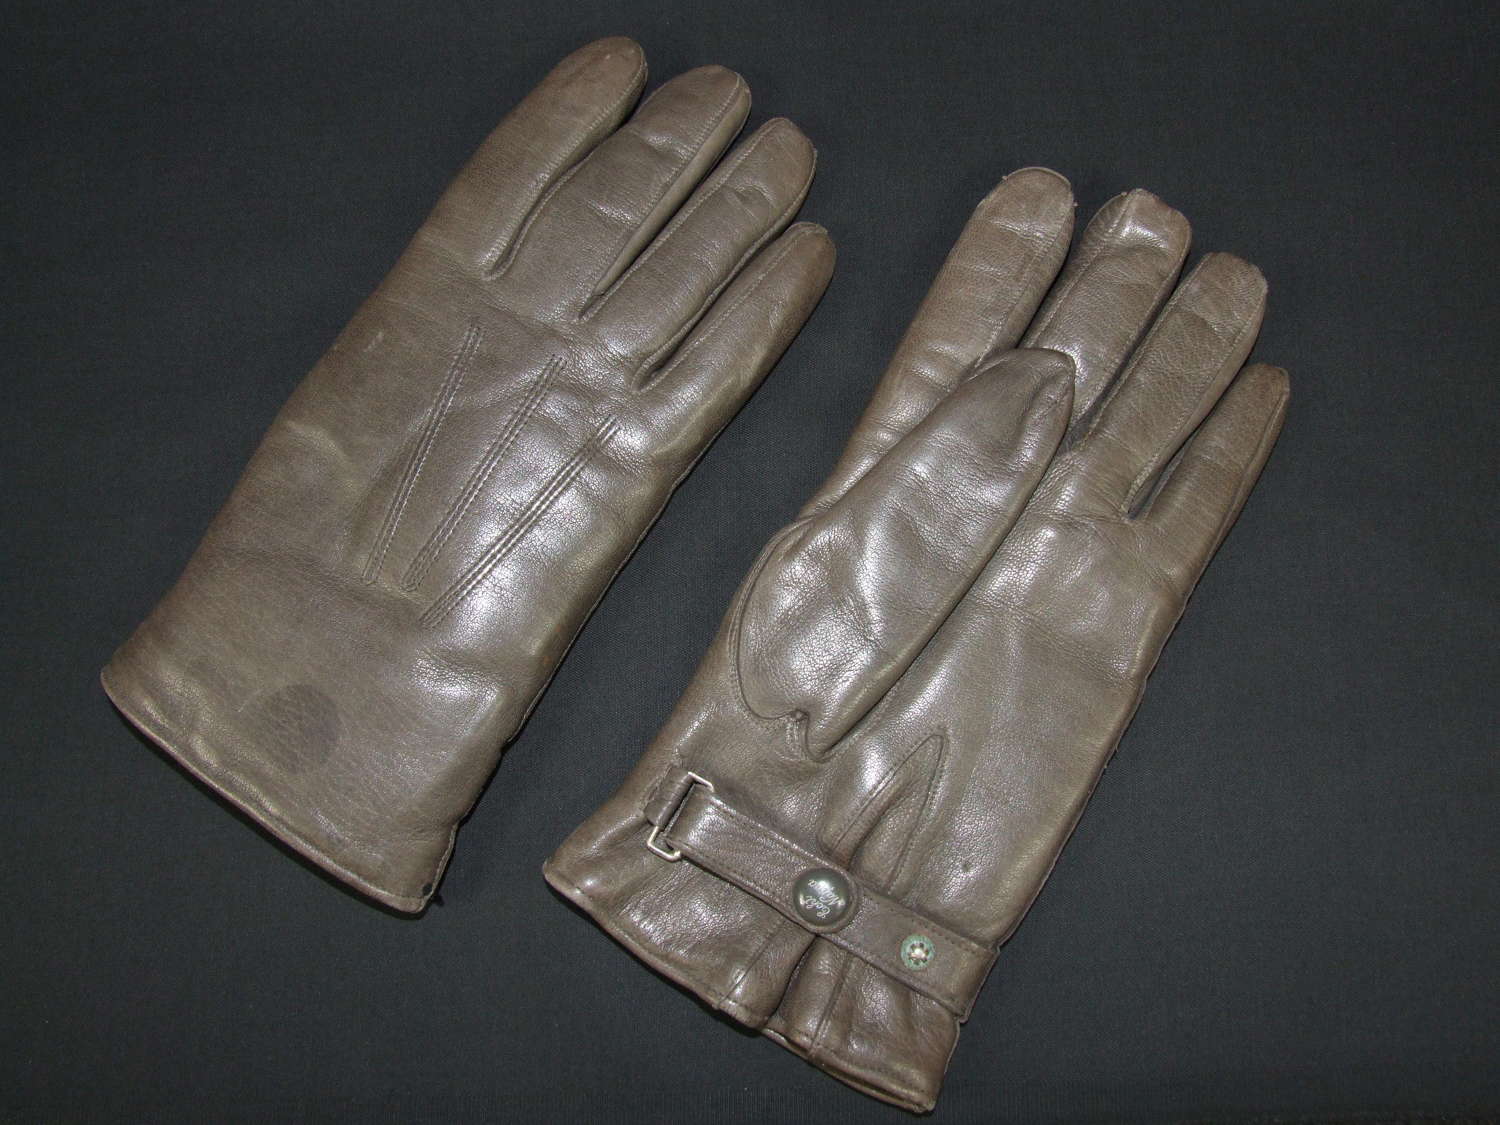 WW2 Luftwaffe Short Grey Leather Gloves with Nappa Press Fasteners